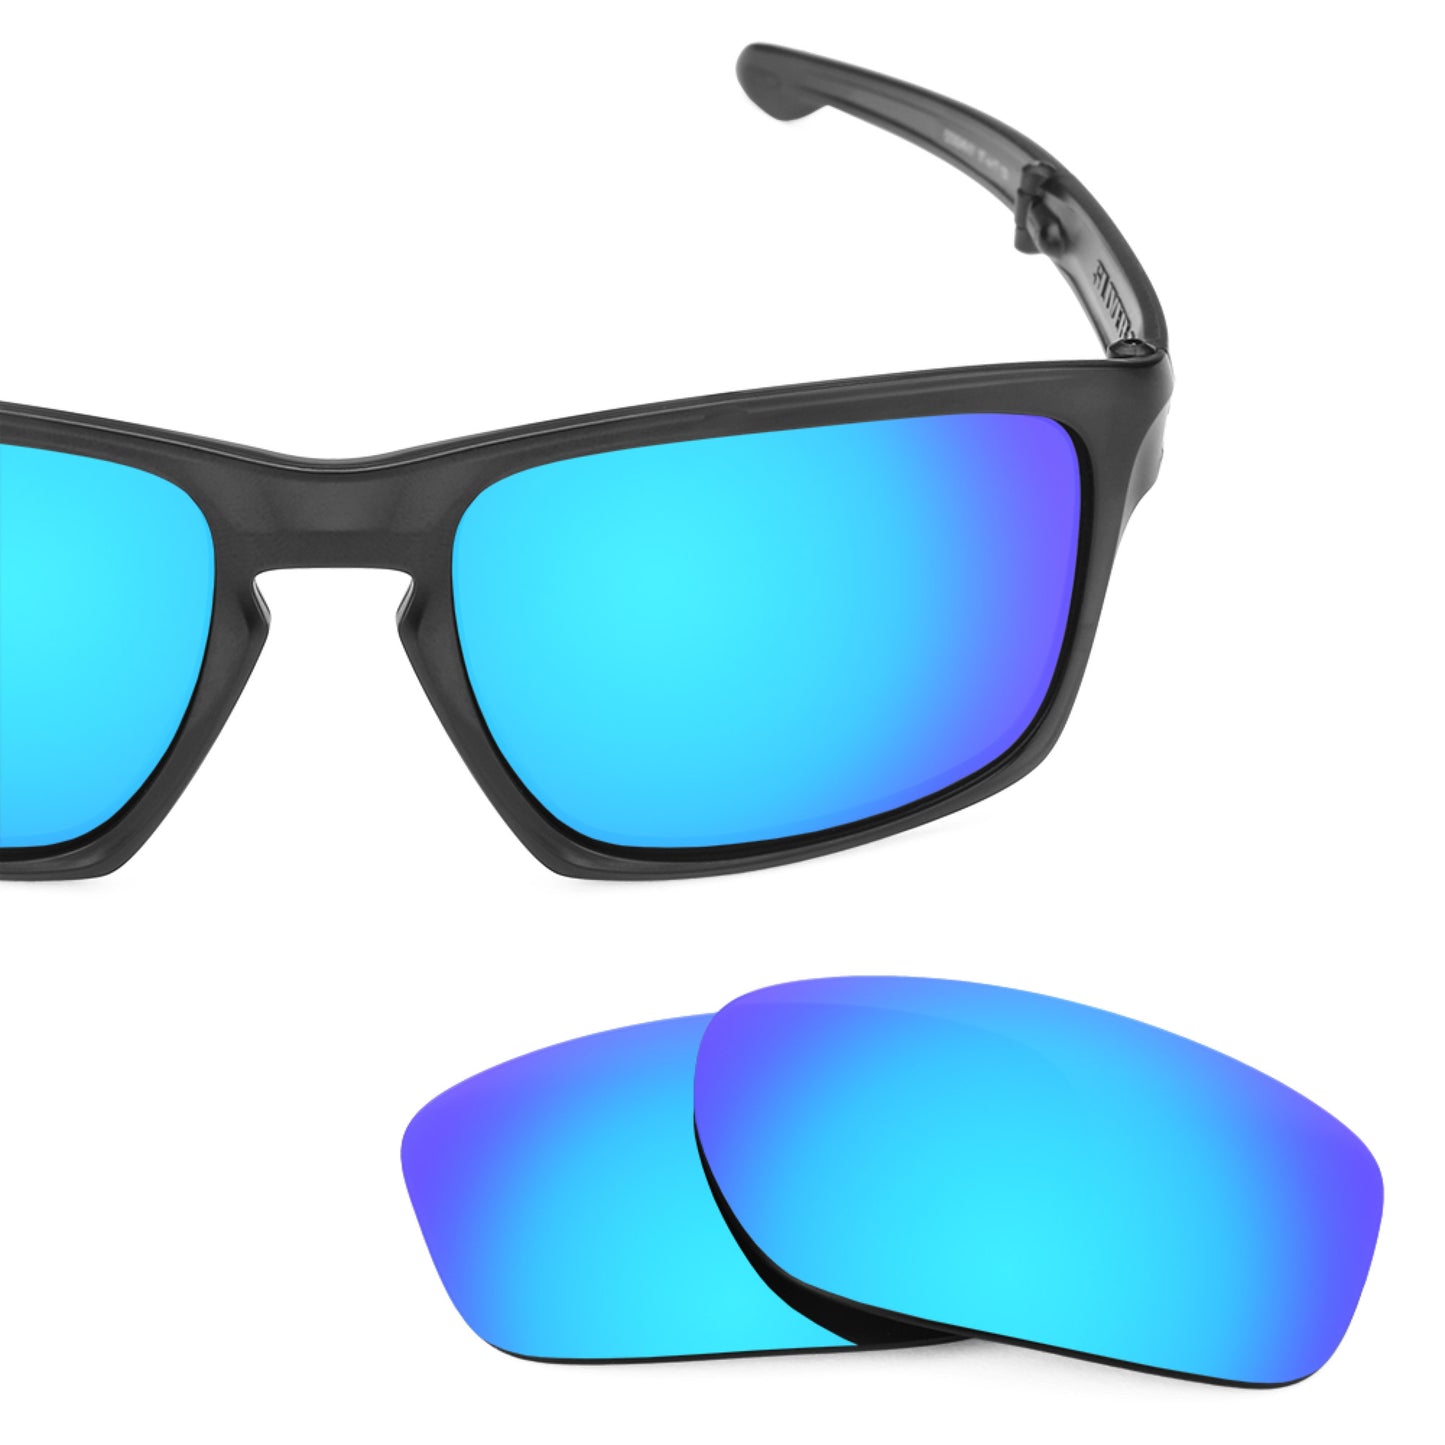 Revant replacement lenses for Oakley Sliver F Non-Polarized Ice Blue